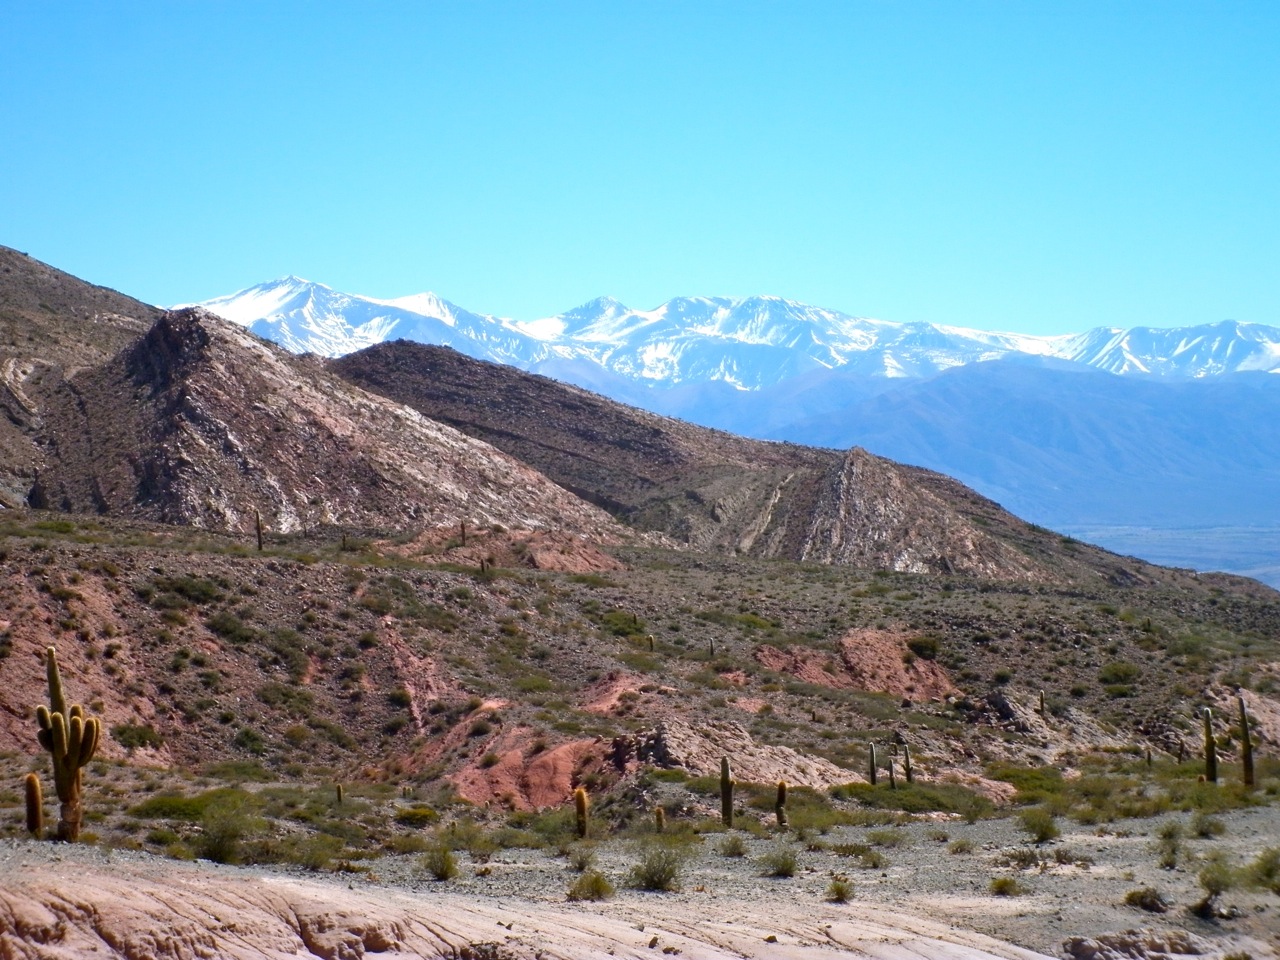 Salta, Argentina Nice View In Photos | Travel And Tourism